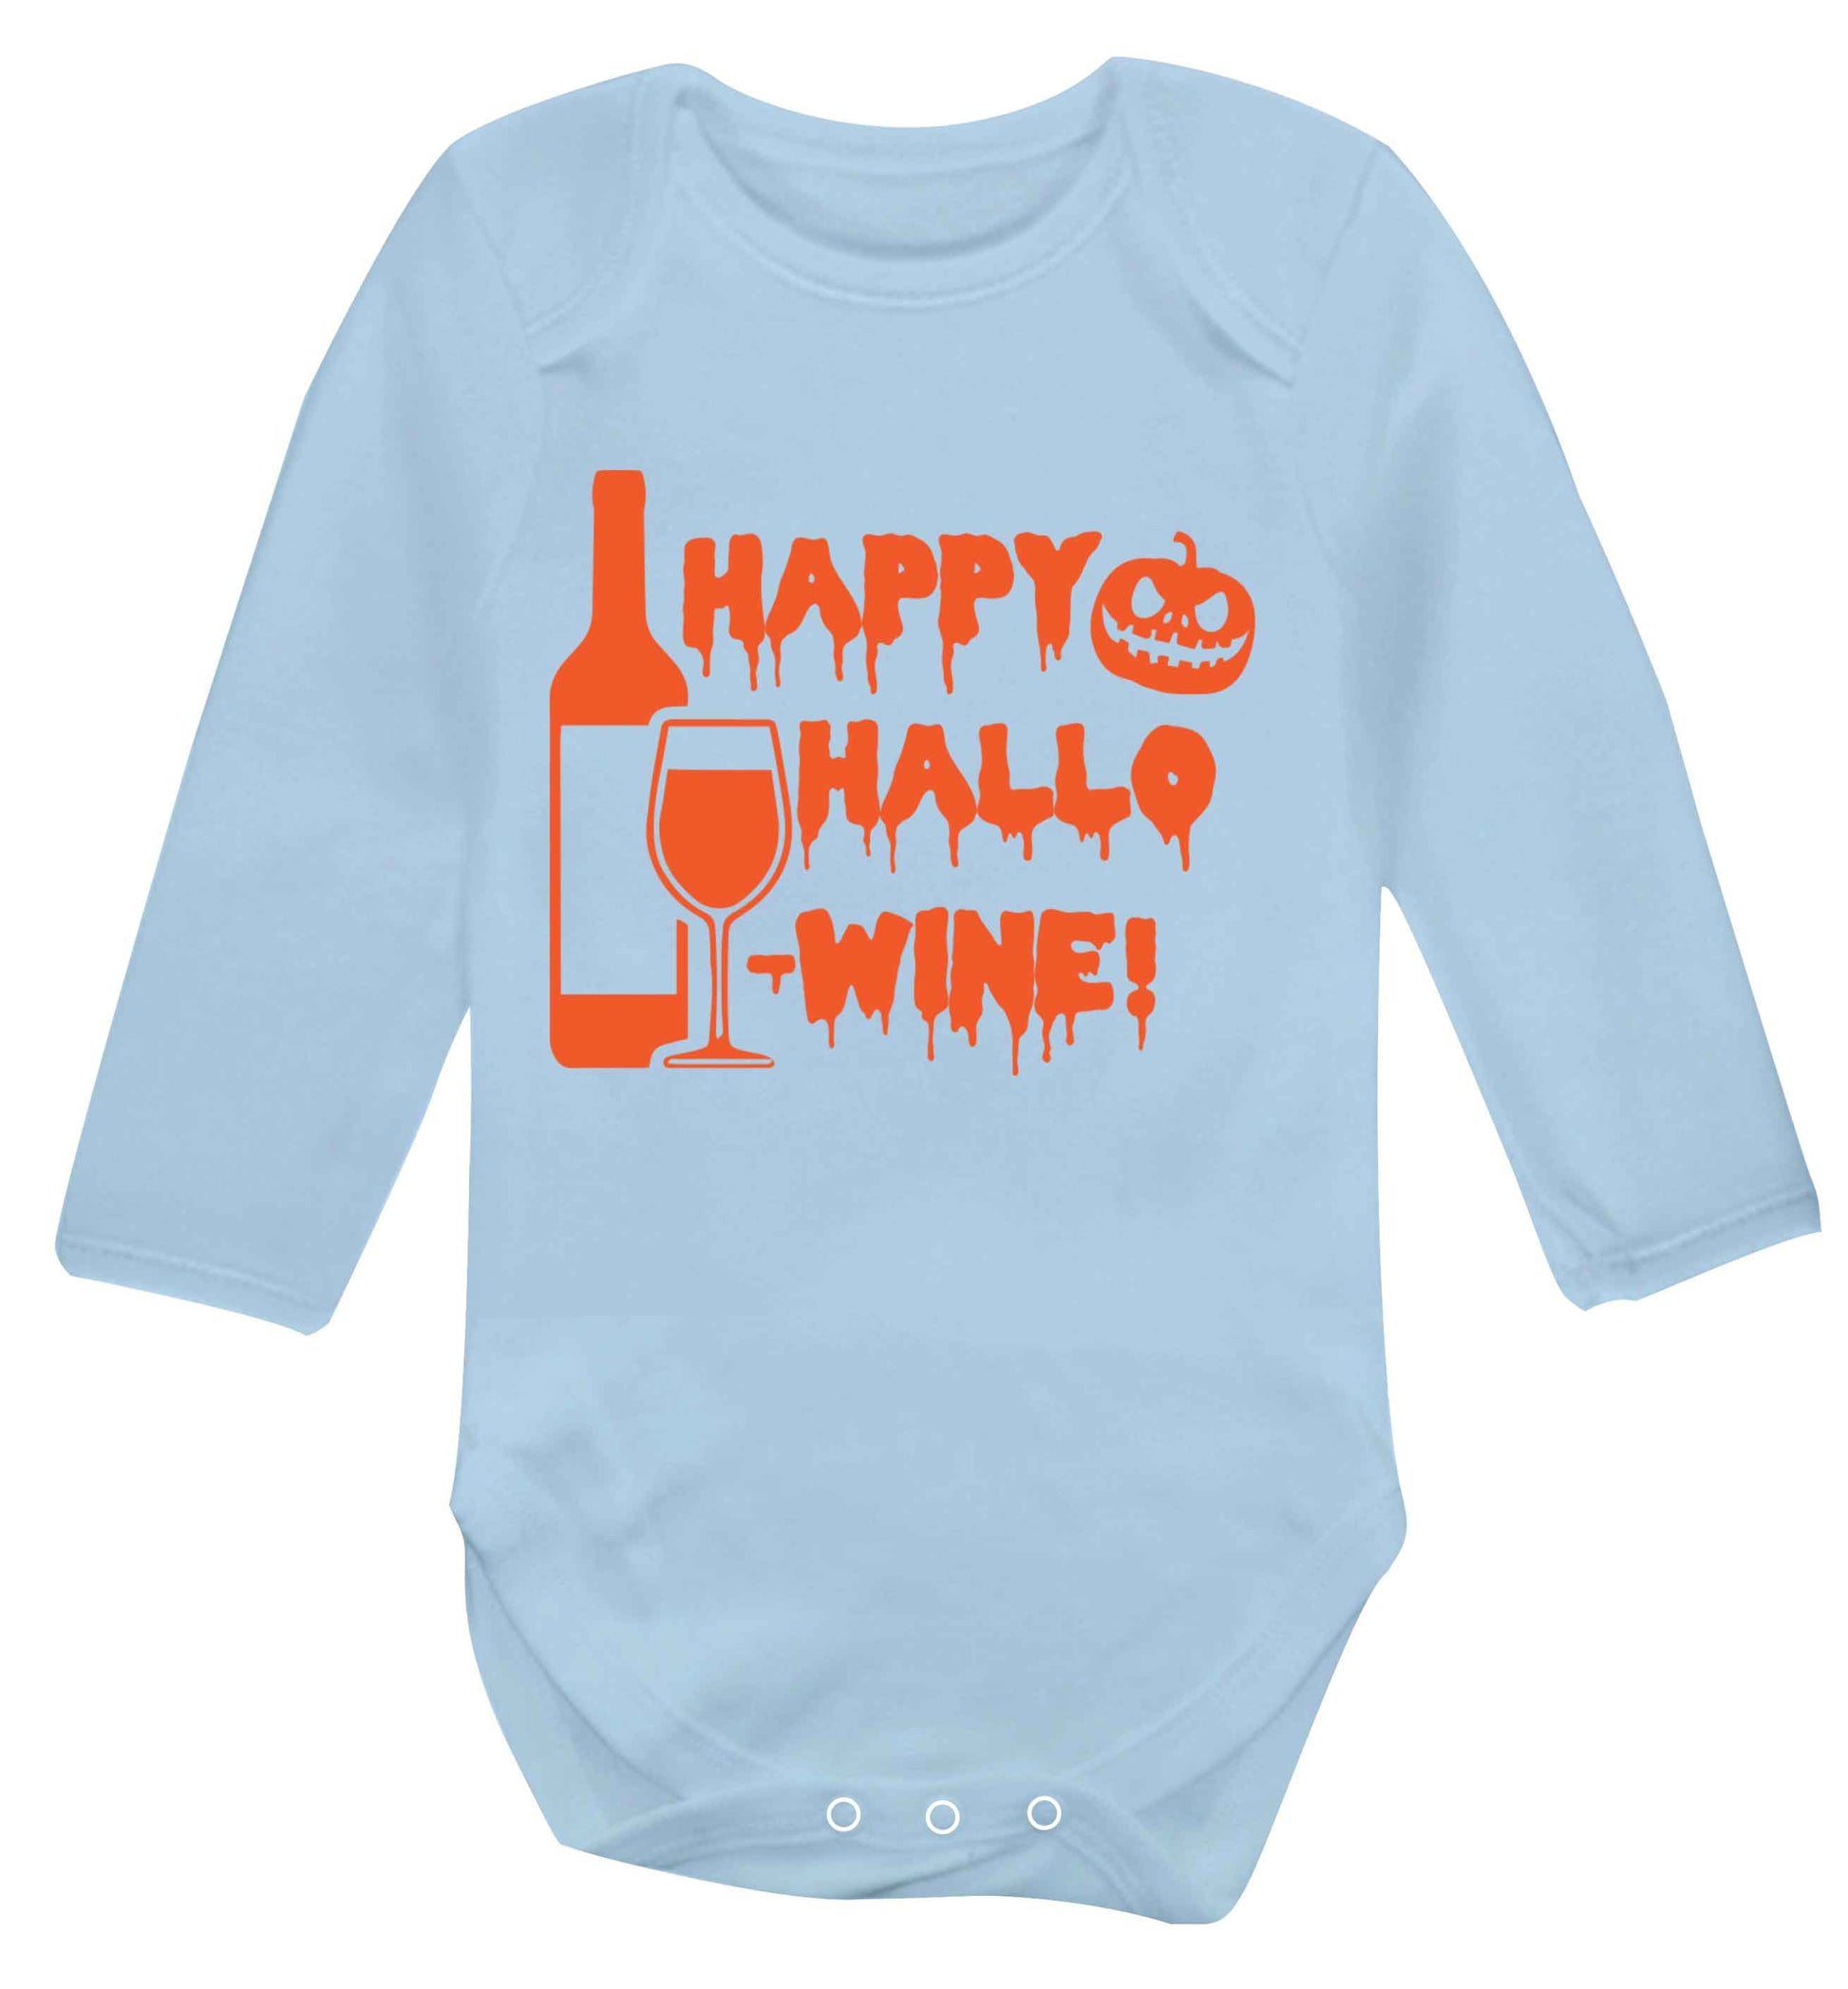 Happy hallow-wine Baby Vest long sleeved pale blue 6-12 months